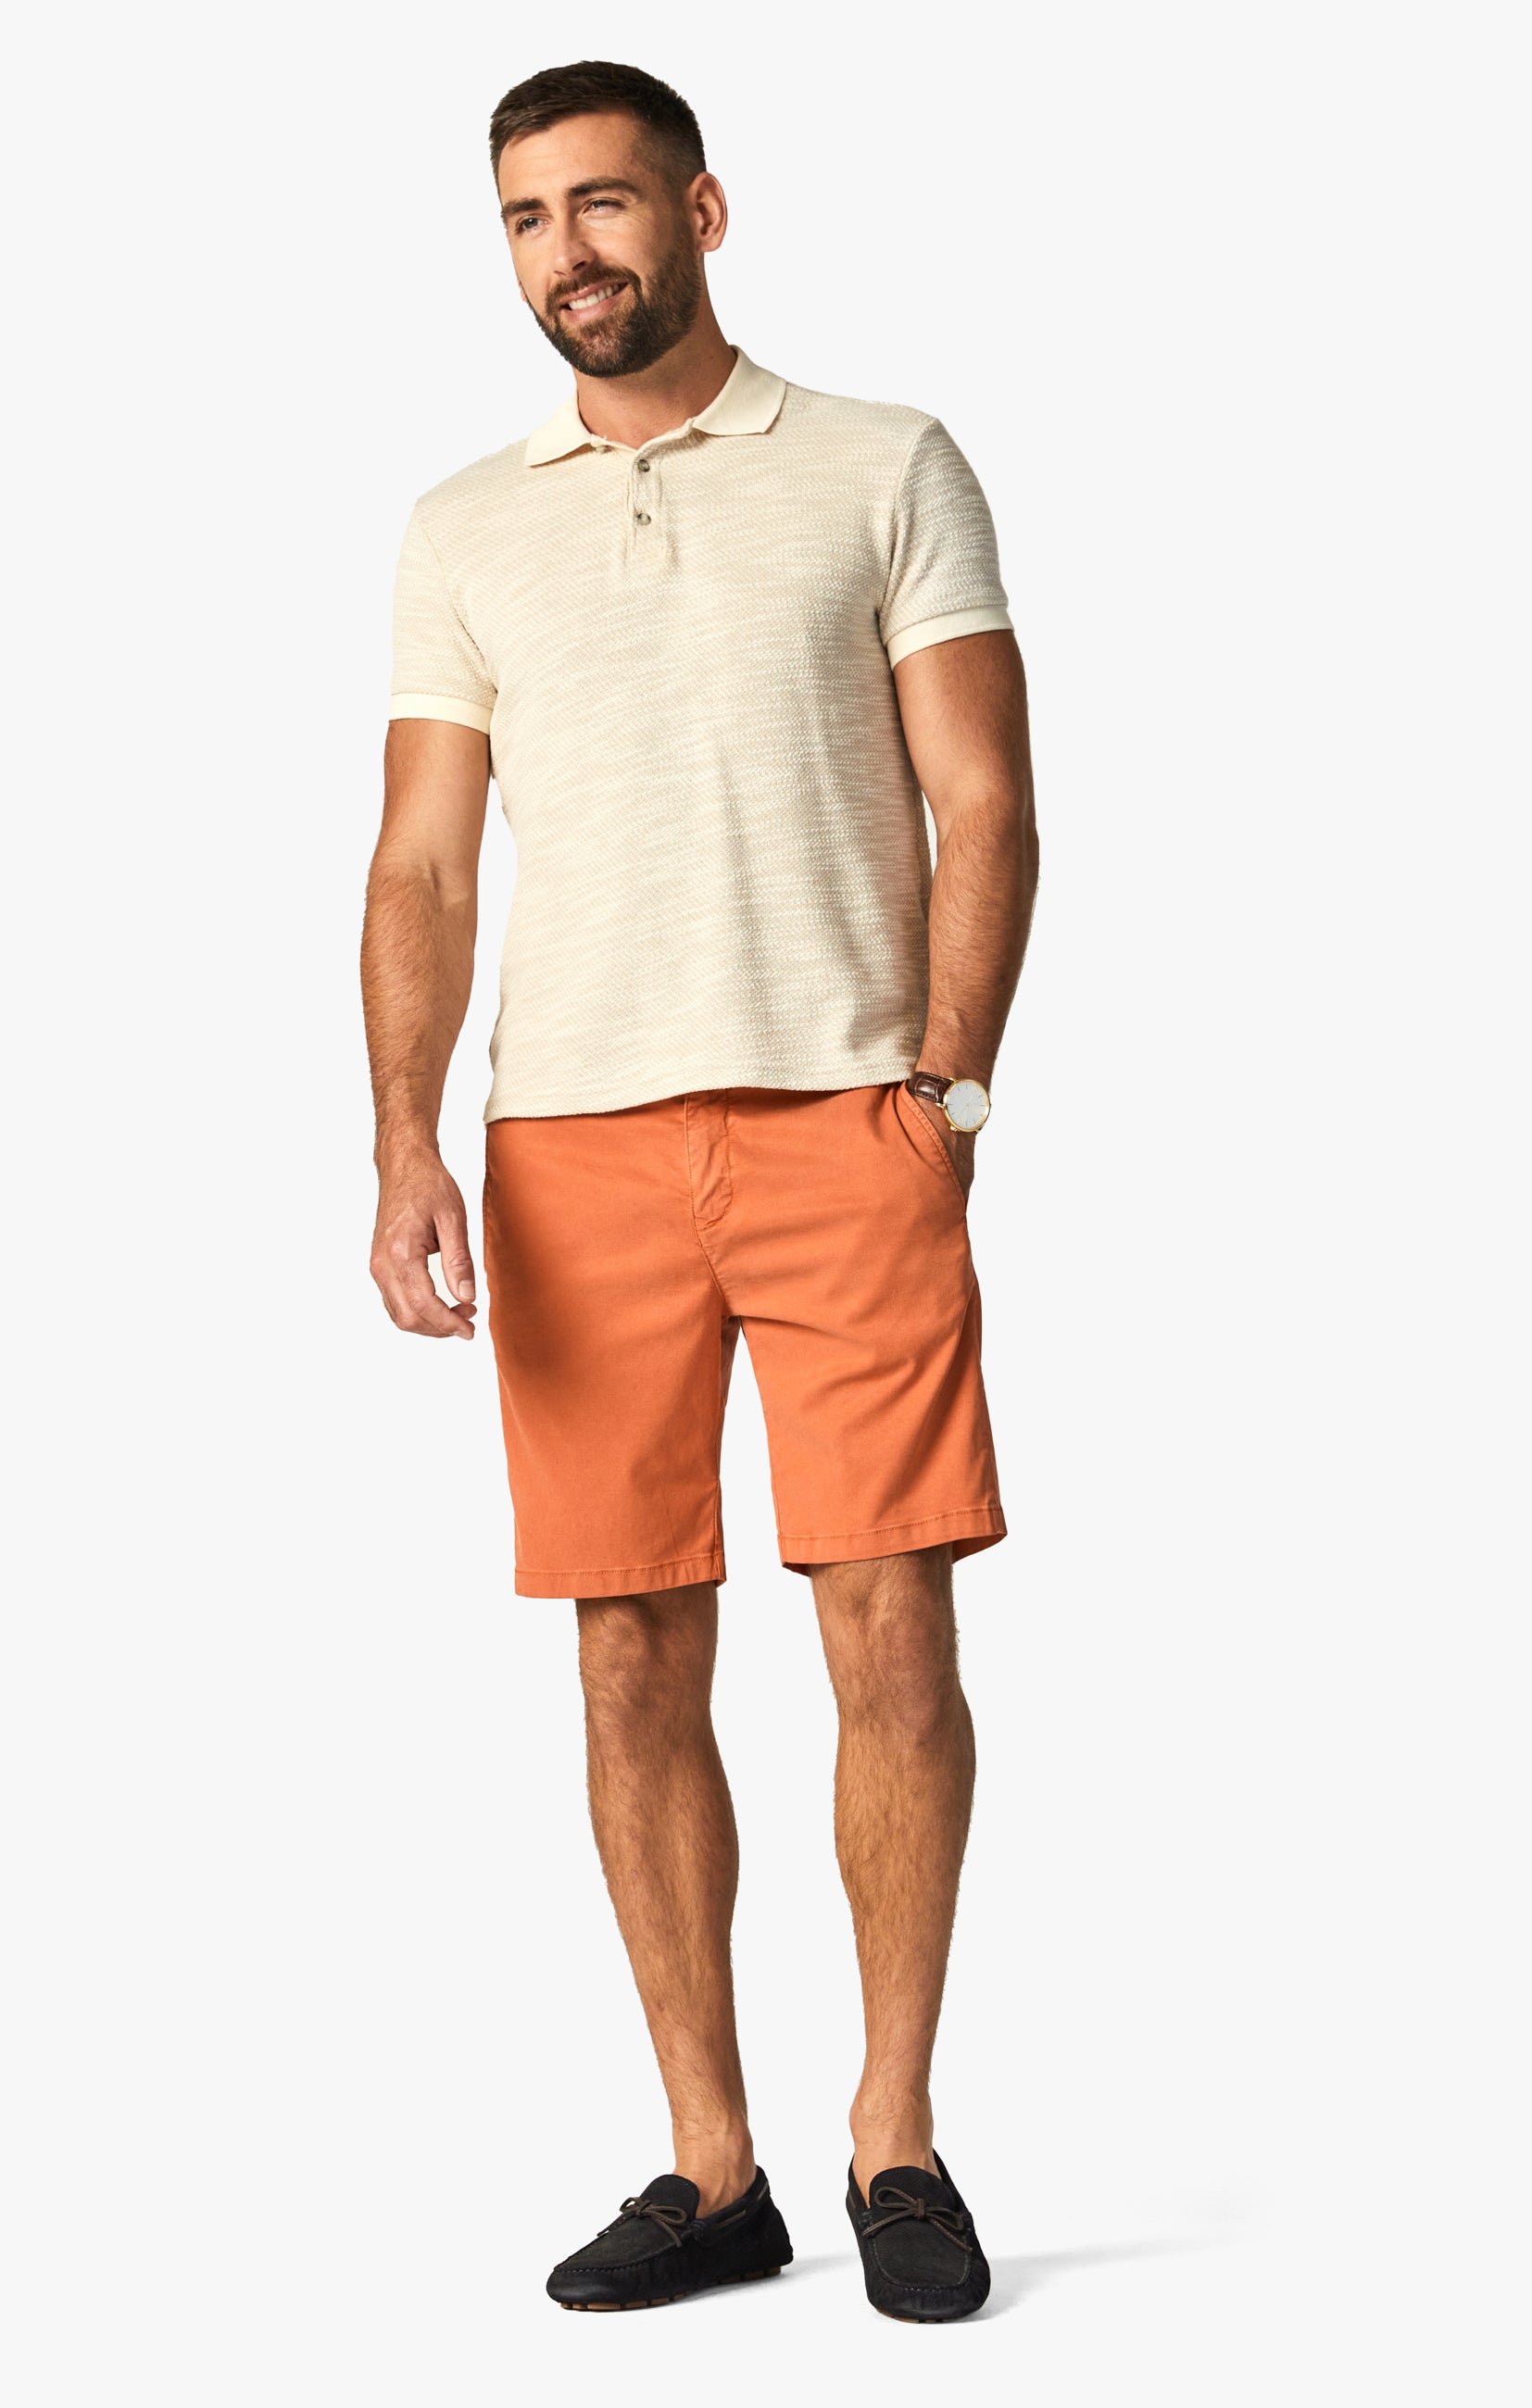 Nevada Shorts In Orange Rust Soft Touch Image 1